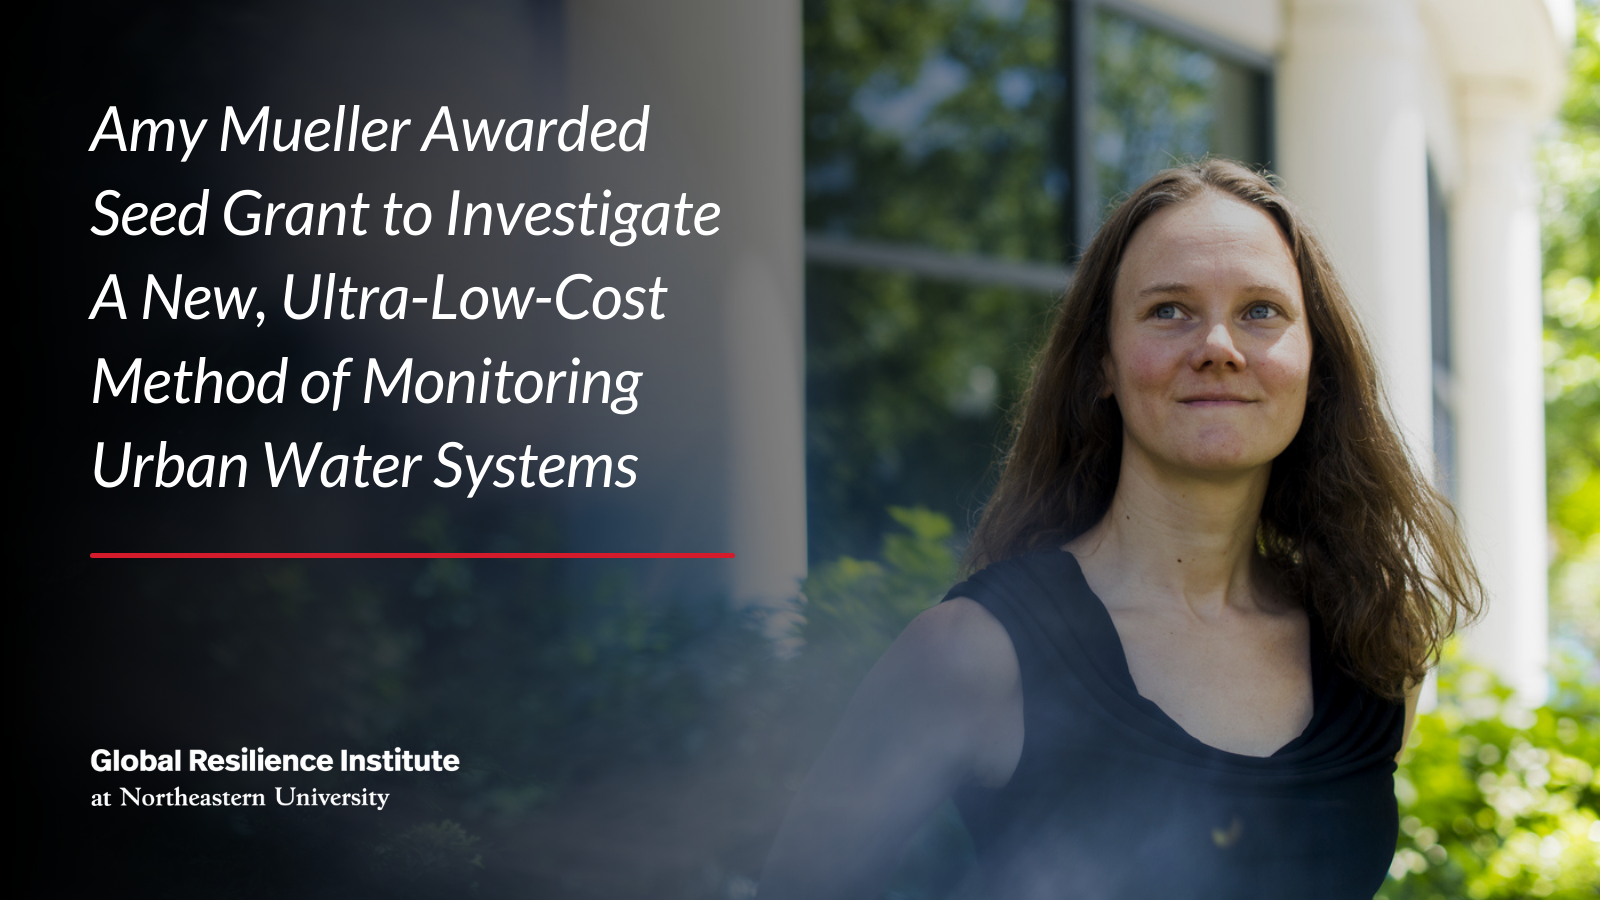 Amy Mueller Awarded Seed Grant to Investigate A New, Ultra-Low-Cost Method of Monitoring Urban Water Systems